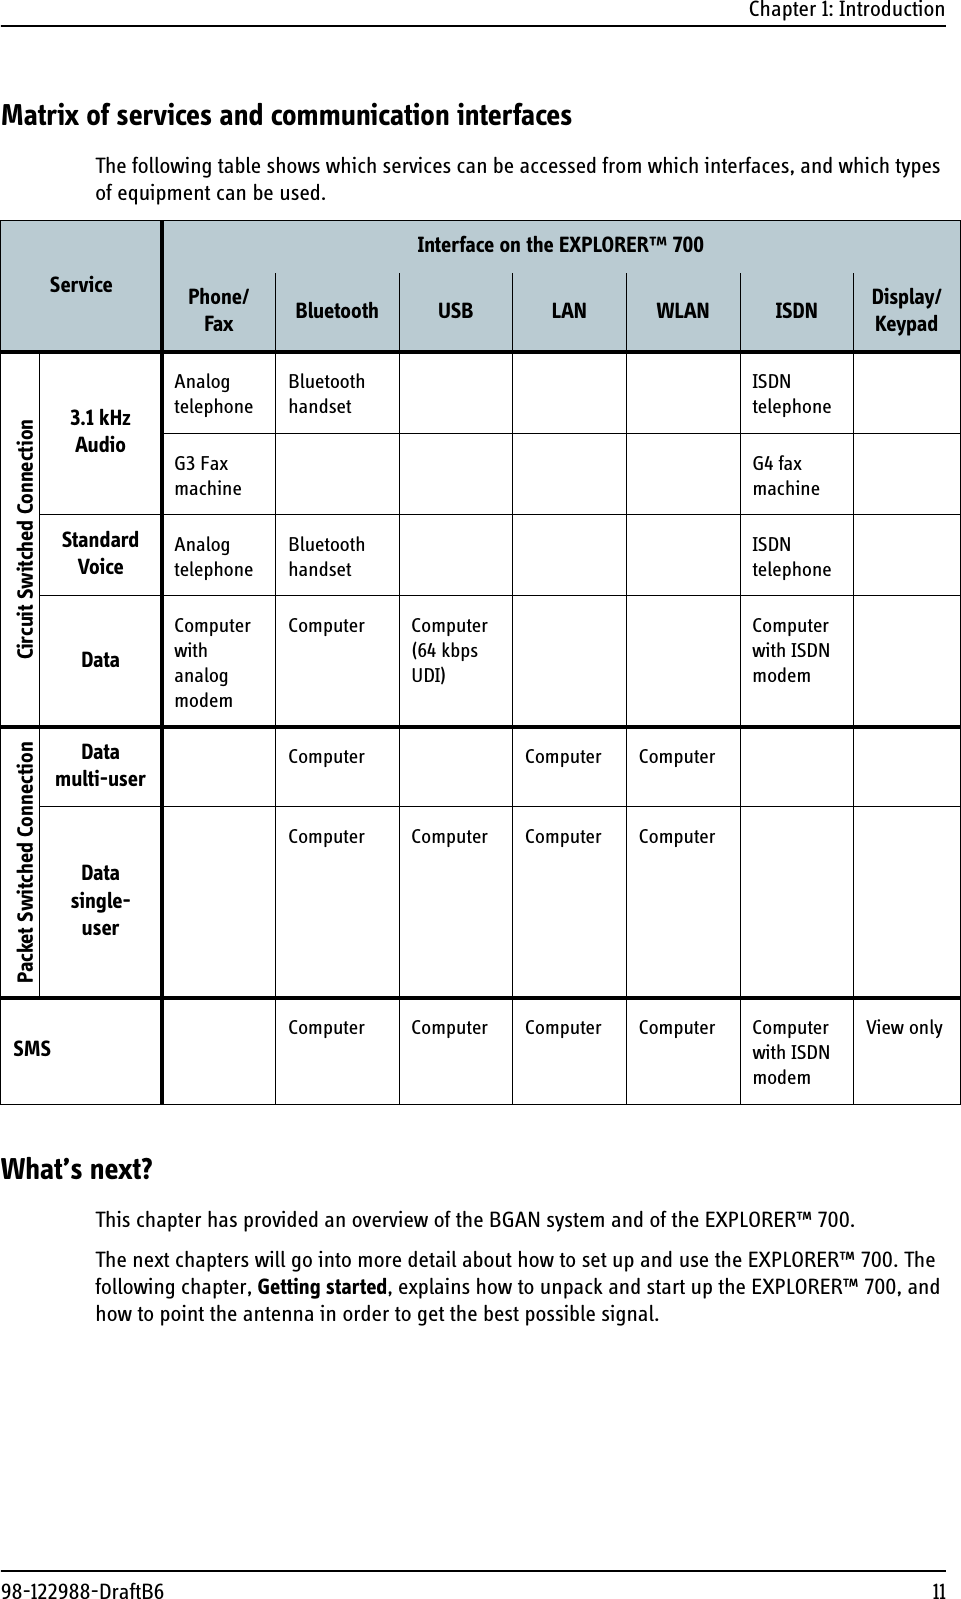 Chapter 1: Introduction98-122988-DraftB6 11Matrix of services and communication interfacesThe following table shows which services can be accessed from which interfaces, and which types of equipment can be used.What’s next?This chapter has provided an overview of the BGAN system and of the EXPLORER™ 700. The next chapters will go into more detail about how to set up and use the EXPLORER™ 700. The following chapter, Getting started, explains how to unpack and start up the EXPLORER™ 700, and how to point the antenna in order to get the best possible signal.ServiceInterface on the EXPLORER™ 700Phone/Fax Bluetooth USB LAN WLAN ISDN Display/KeypadCircuit Switched Connection3.1 kHz AudioAnalog telephoneBluetooth handsetISDN telephoneG3 Fax machineG4 fax machineStandard VoiceAnalog telephoneBluetooth handsetISDN telephoneDataComputer with analog modemComputer Computer(64 kbps UDI)Computer with ISDN modemPacket Switched ConnectionDatamulti-userComputer Computer ComputerDatasingle-userComputer Computer Computer ComputerSMSComputer Computer Computer Computer Computer with ISDN modemView only